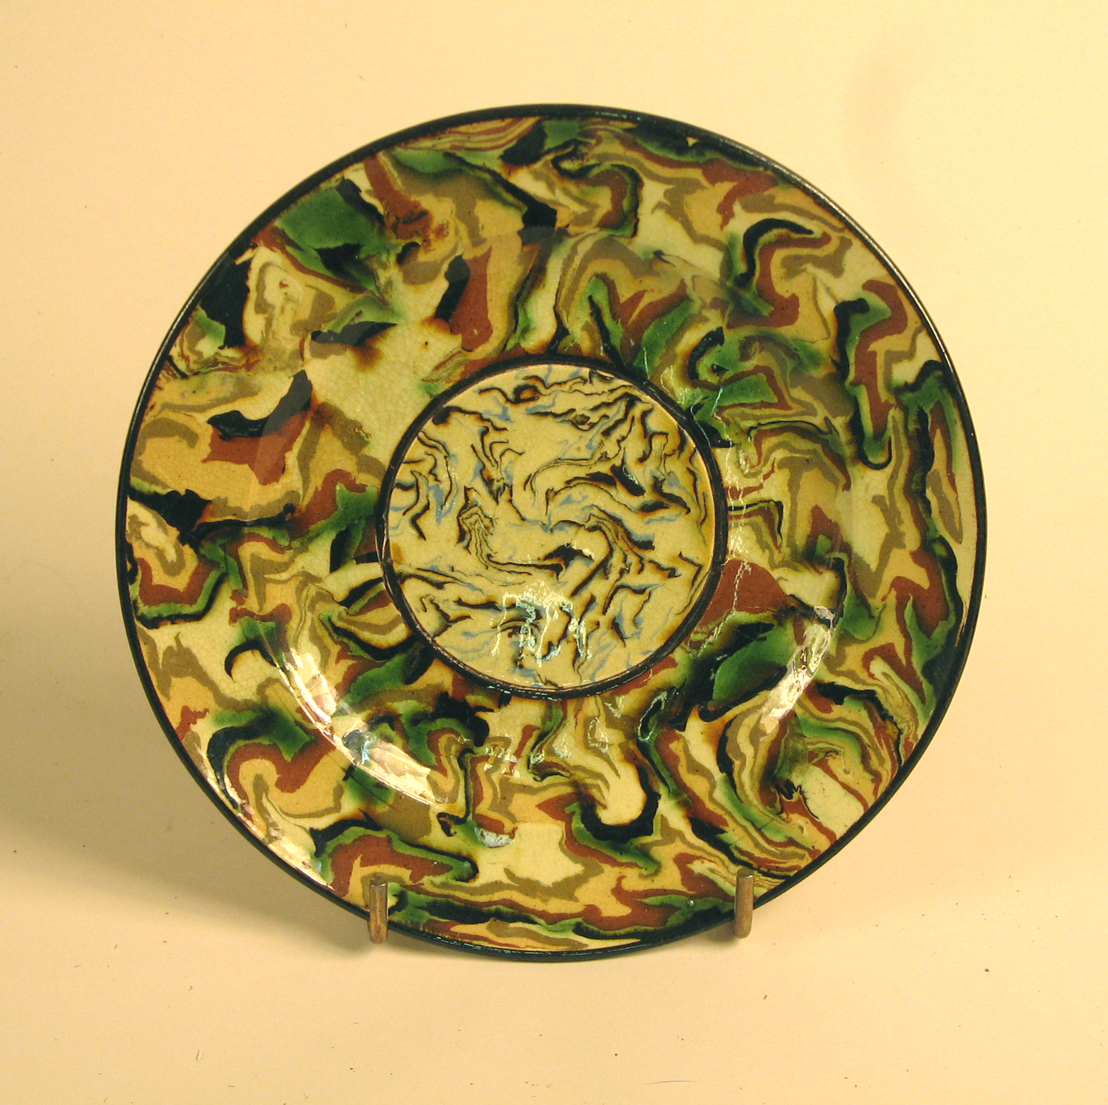 Post image for A Mixed Earth Plate by Pichon